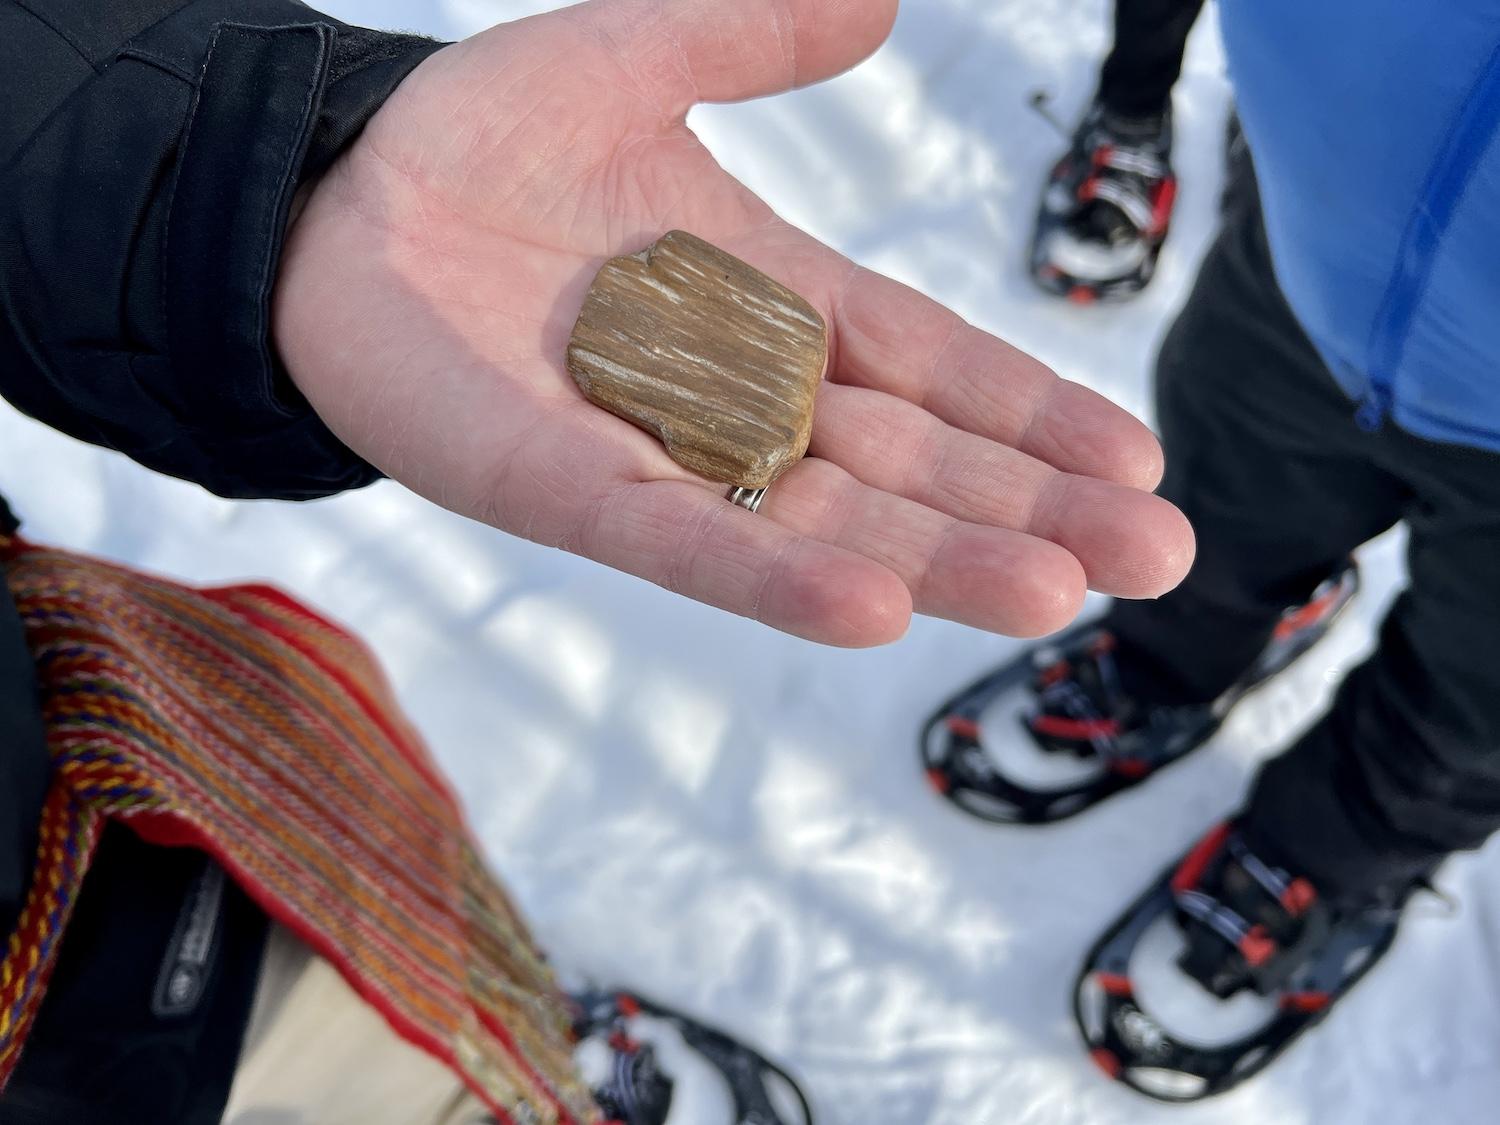 Talking Rock Tours founder Keith Diakiw, a geologist, shows off a piece of petrified wood.